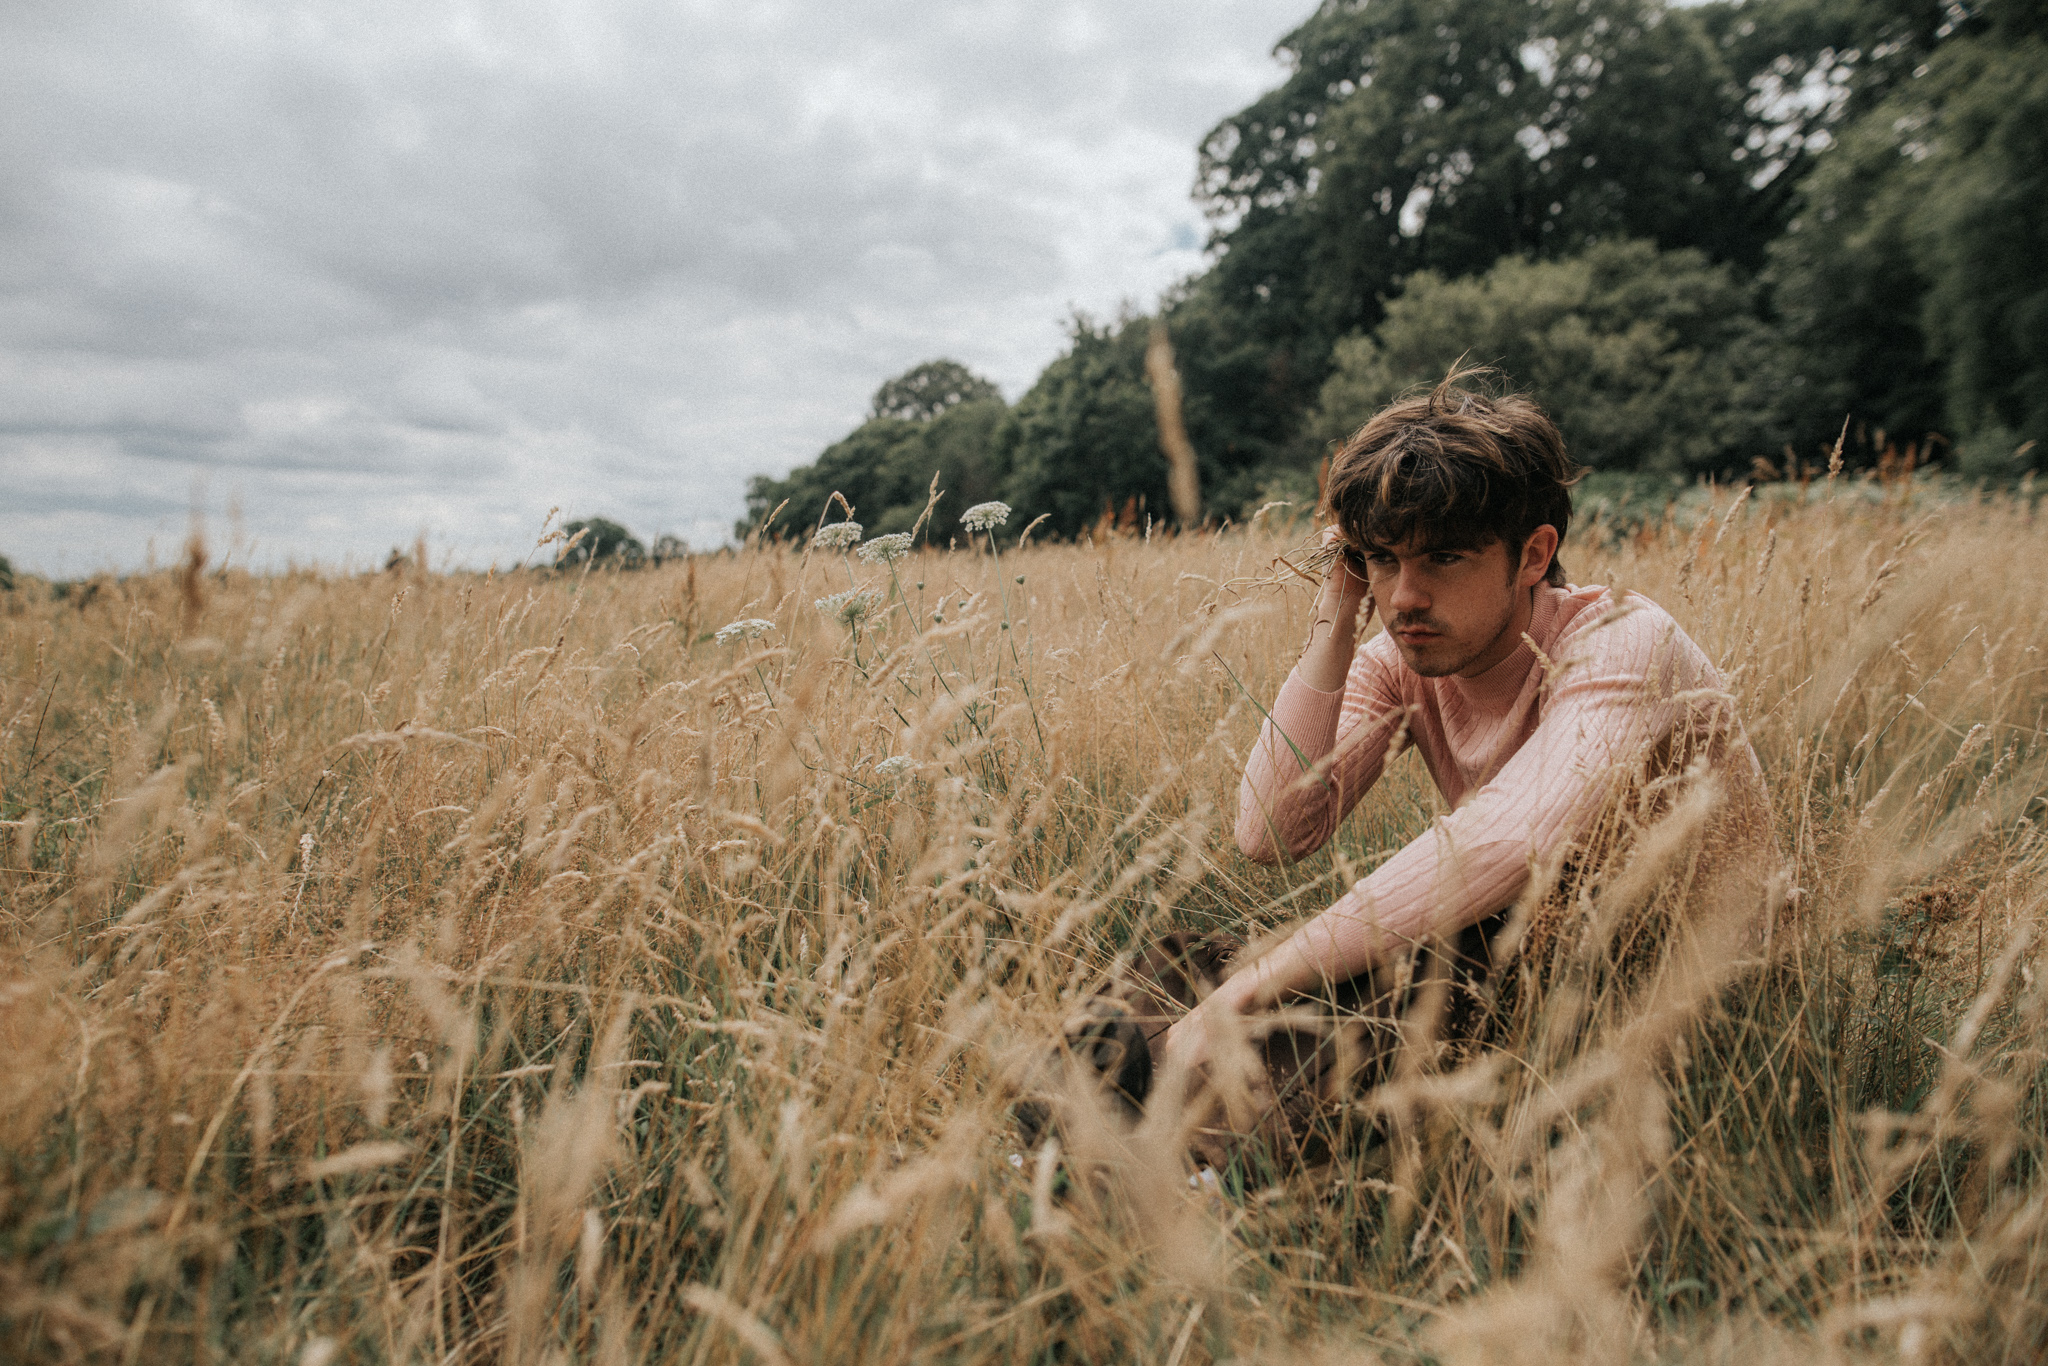 Declan McKenna and the intersection between humanity’s predictable past and uncertain future